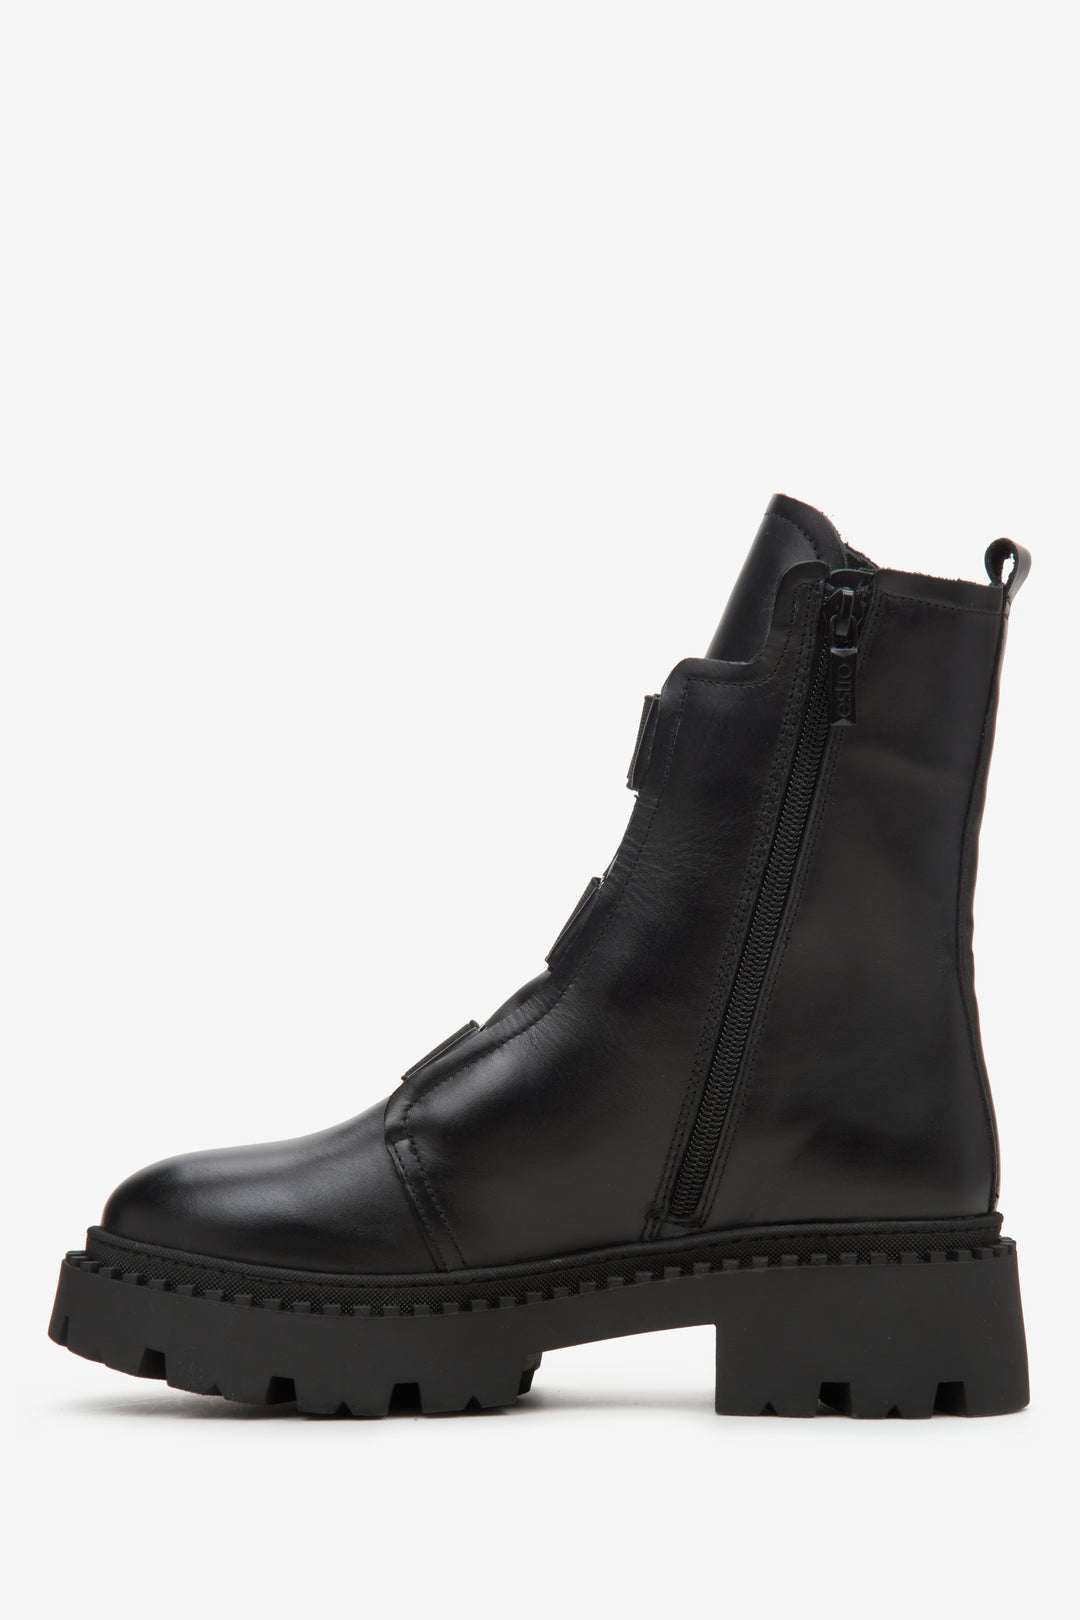 Estro women's black leather ankle boots with soft uppers - shoe profile.